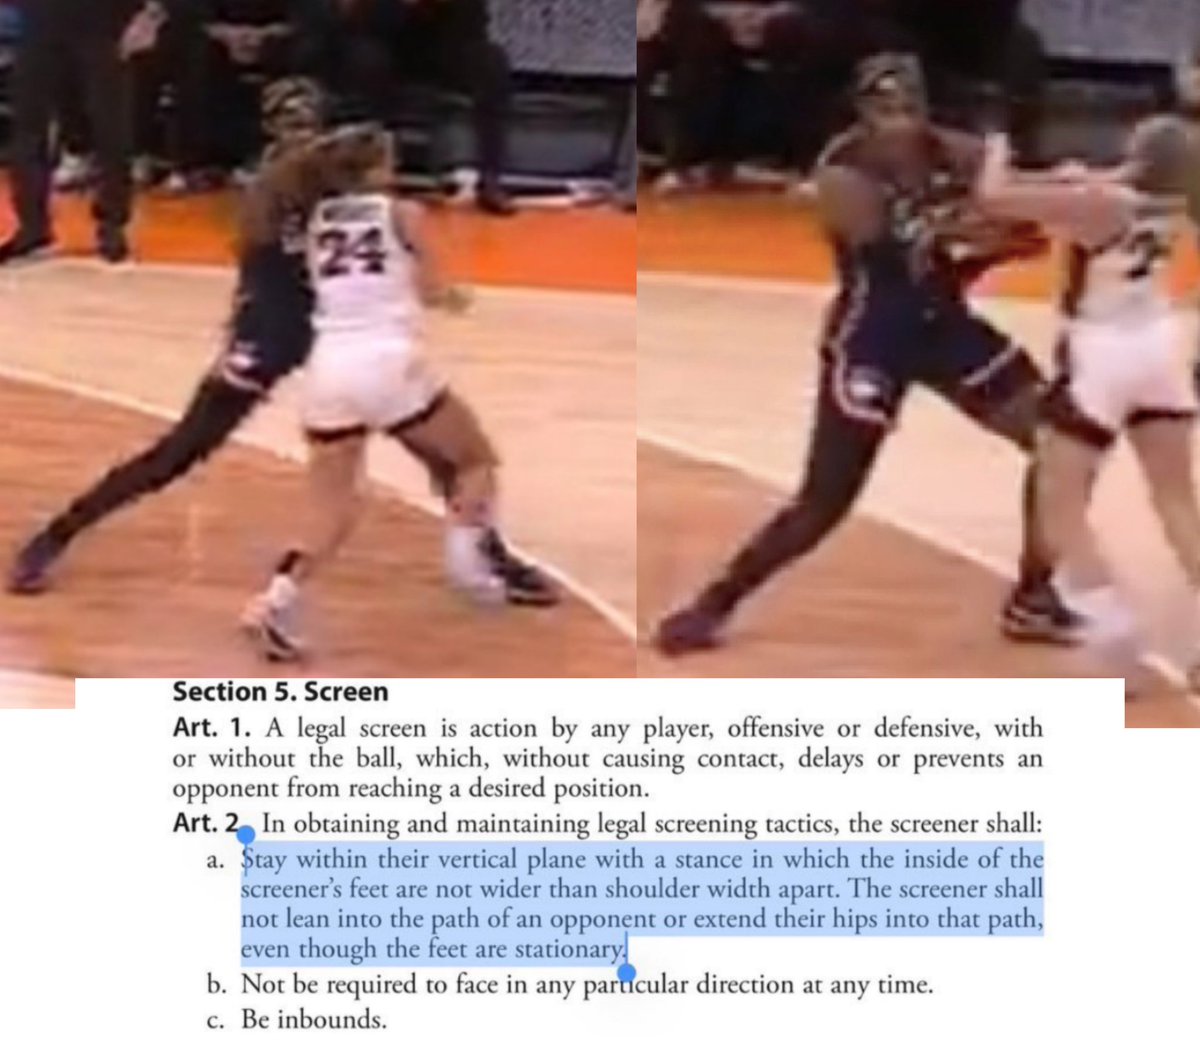 Honestly, I can't believe this call is even being debated. If the refs DON'T call this, and Paige winds up hitting a game winning shot coming off of a grossly illegal screen, guess what- the refs would have played a major role in determining the outcome of the game.